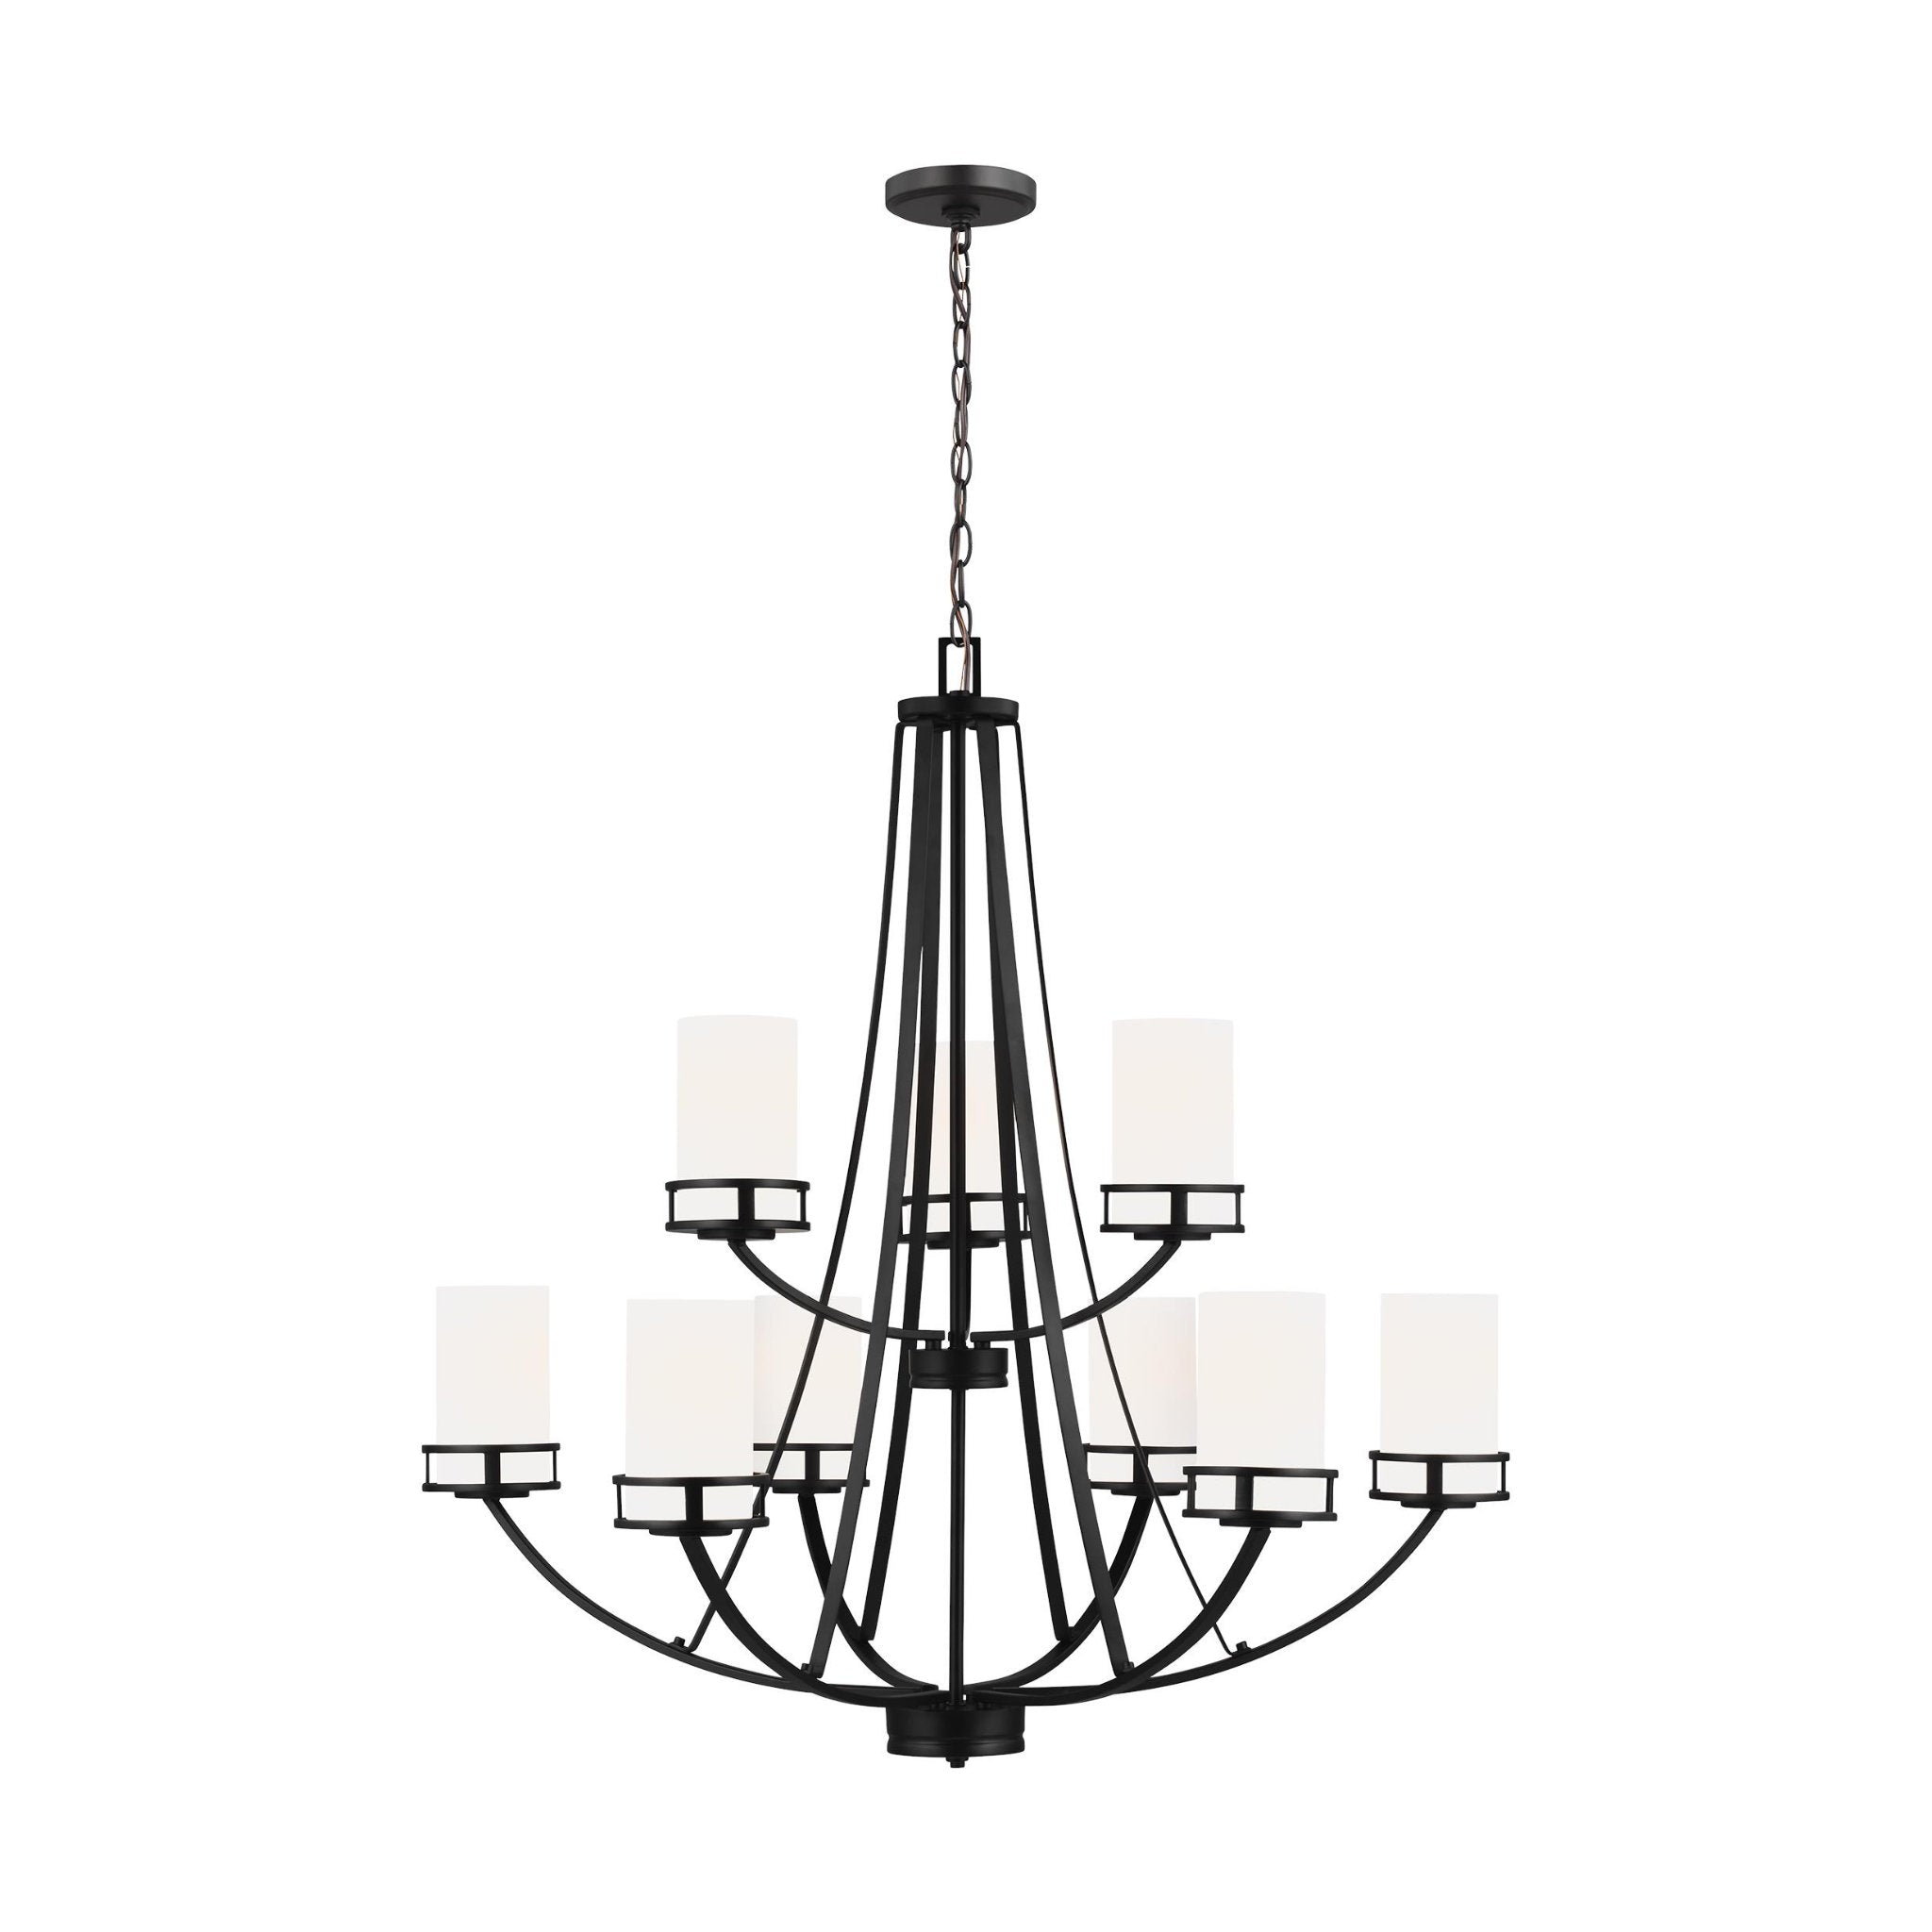 Robie Nine Light Chandelier Transitional 34" Height Steel Round Etched / White Inside Shade in Midnight Black